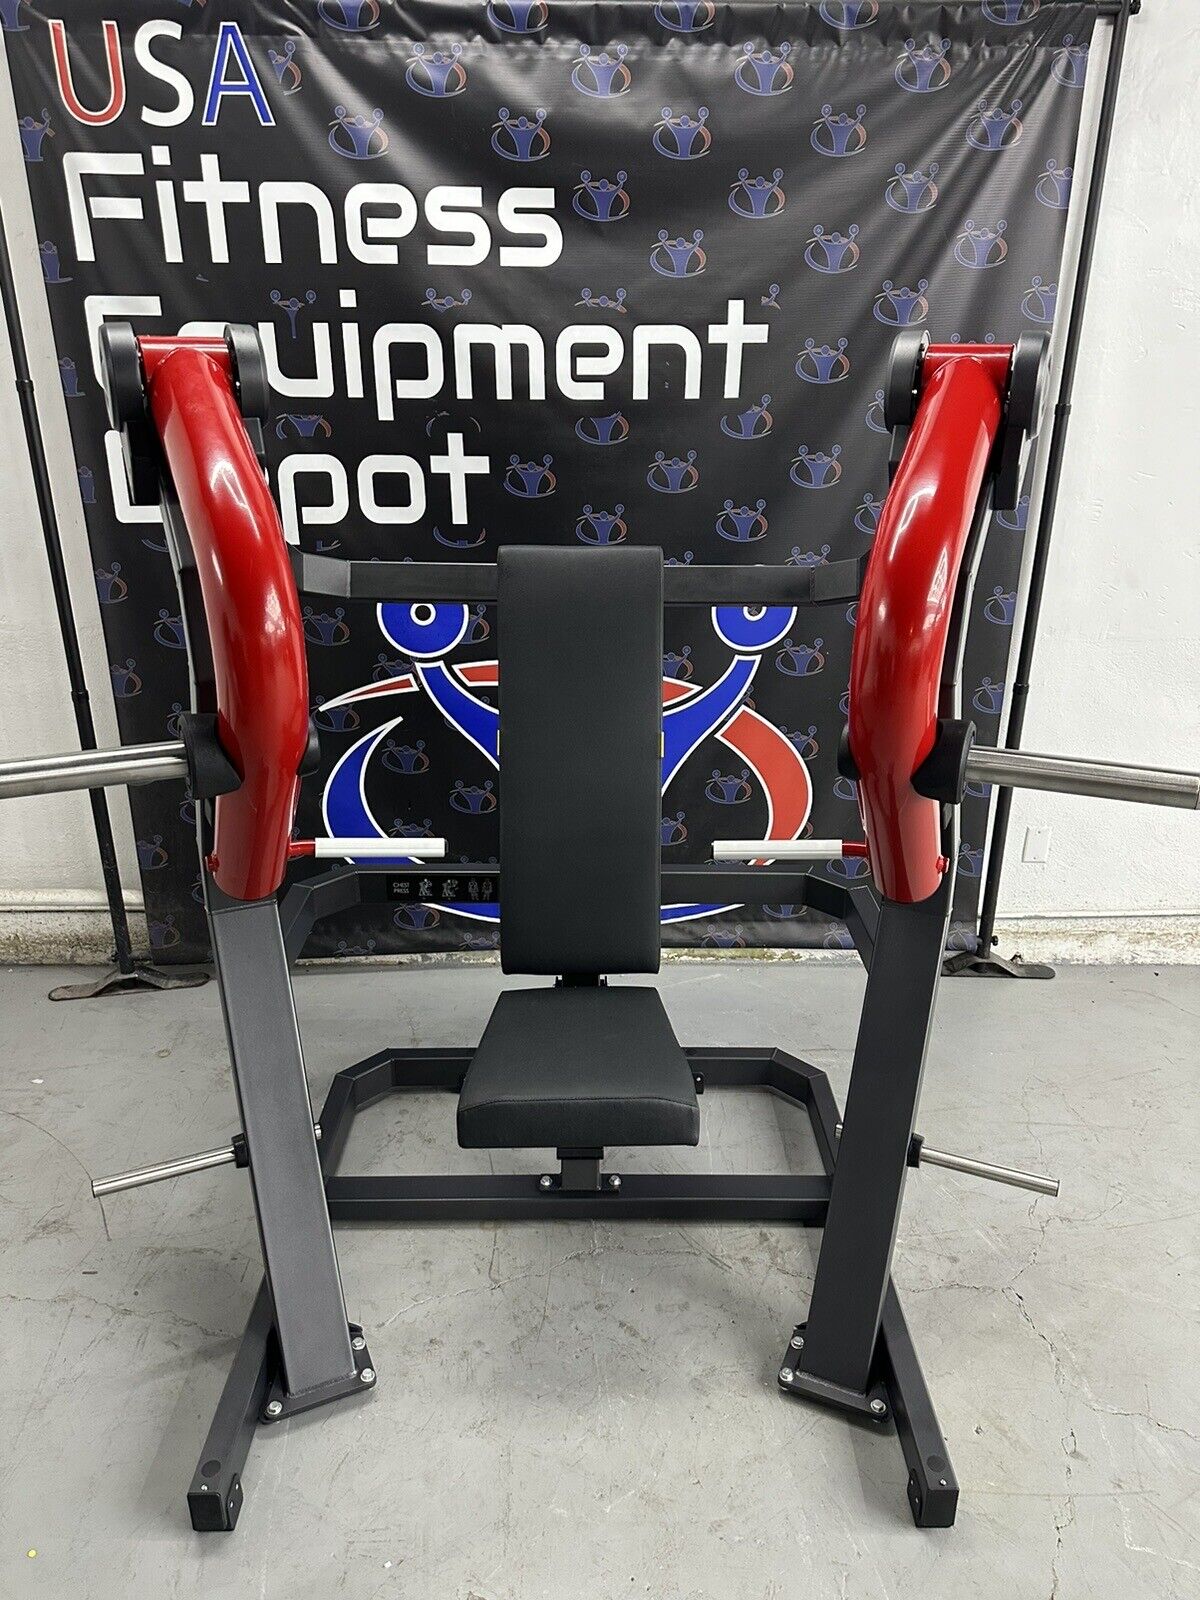 PLATE LOADED  Chest Press - PRIME Fitness USA